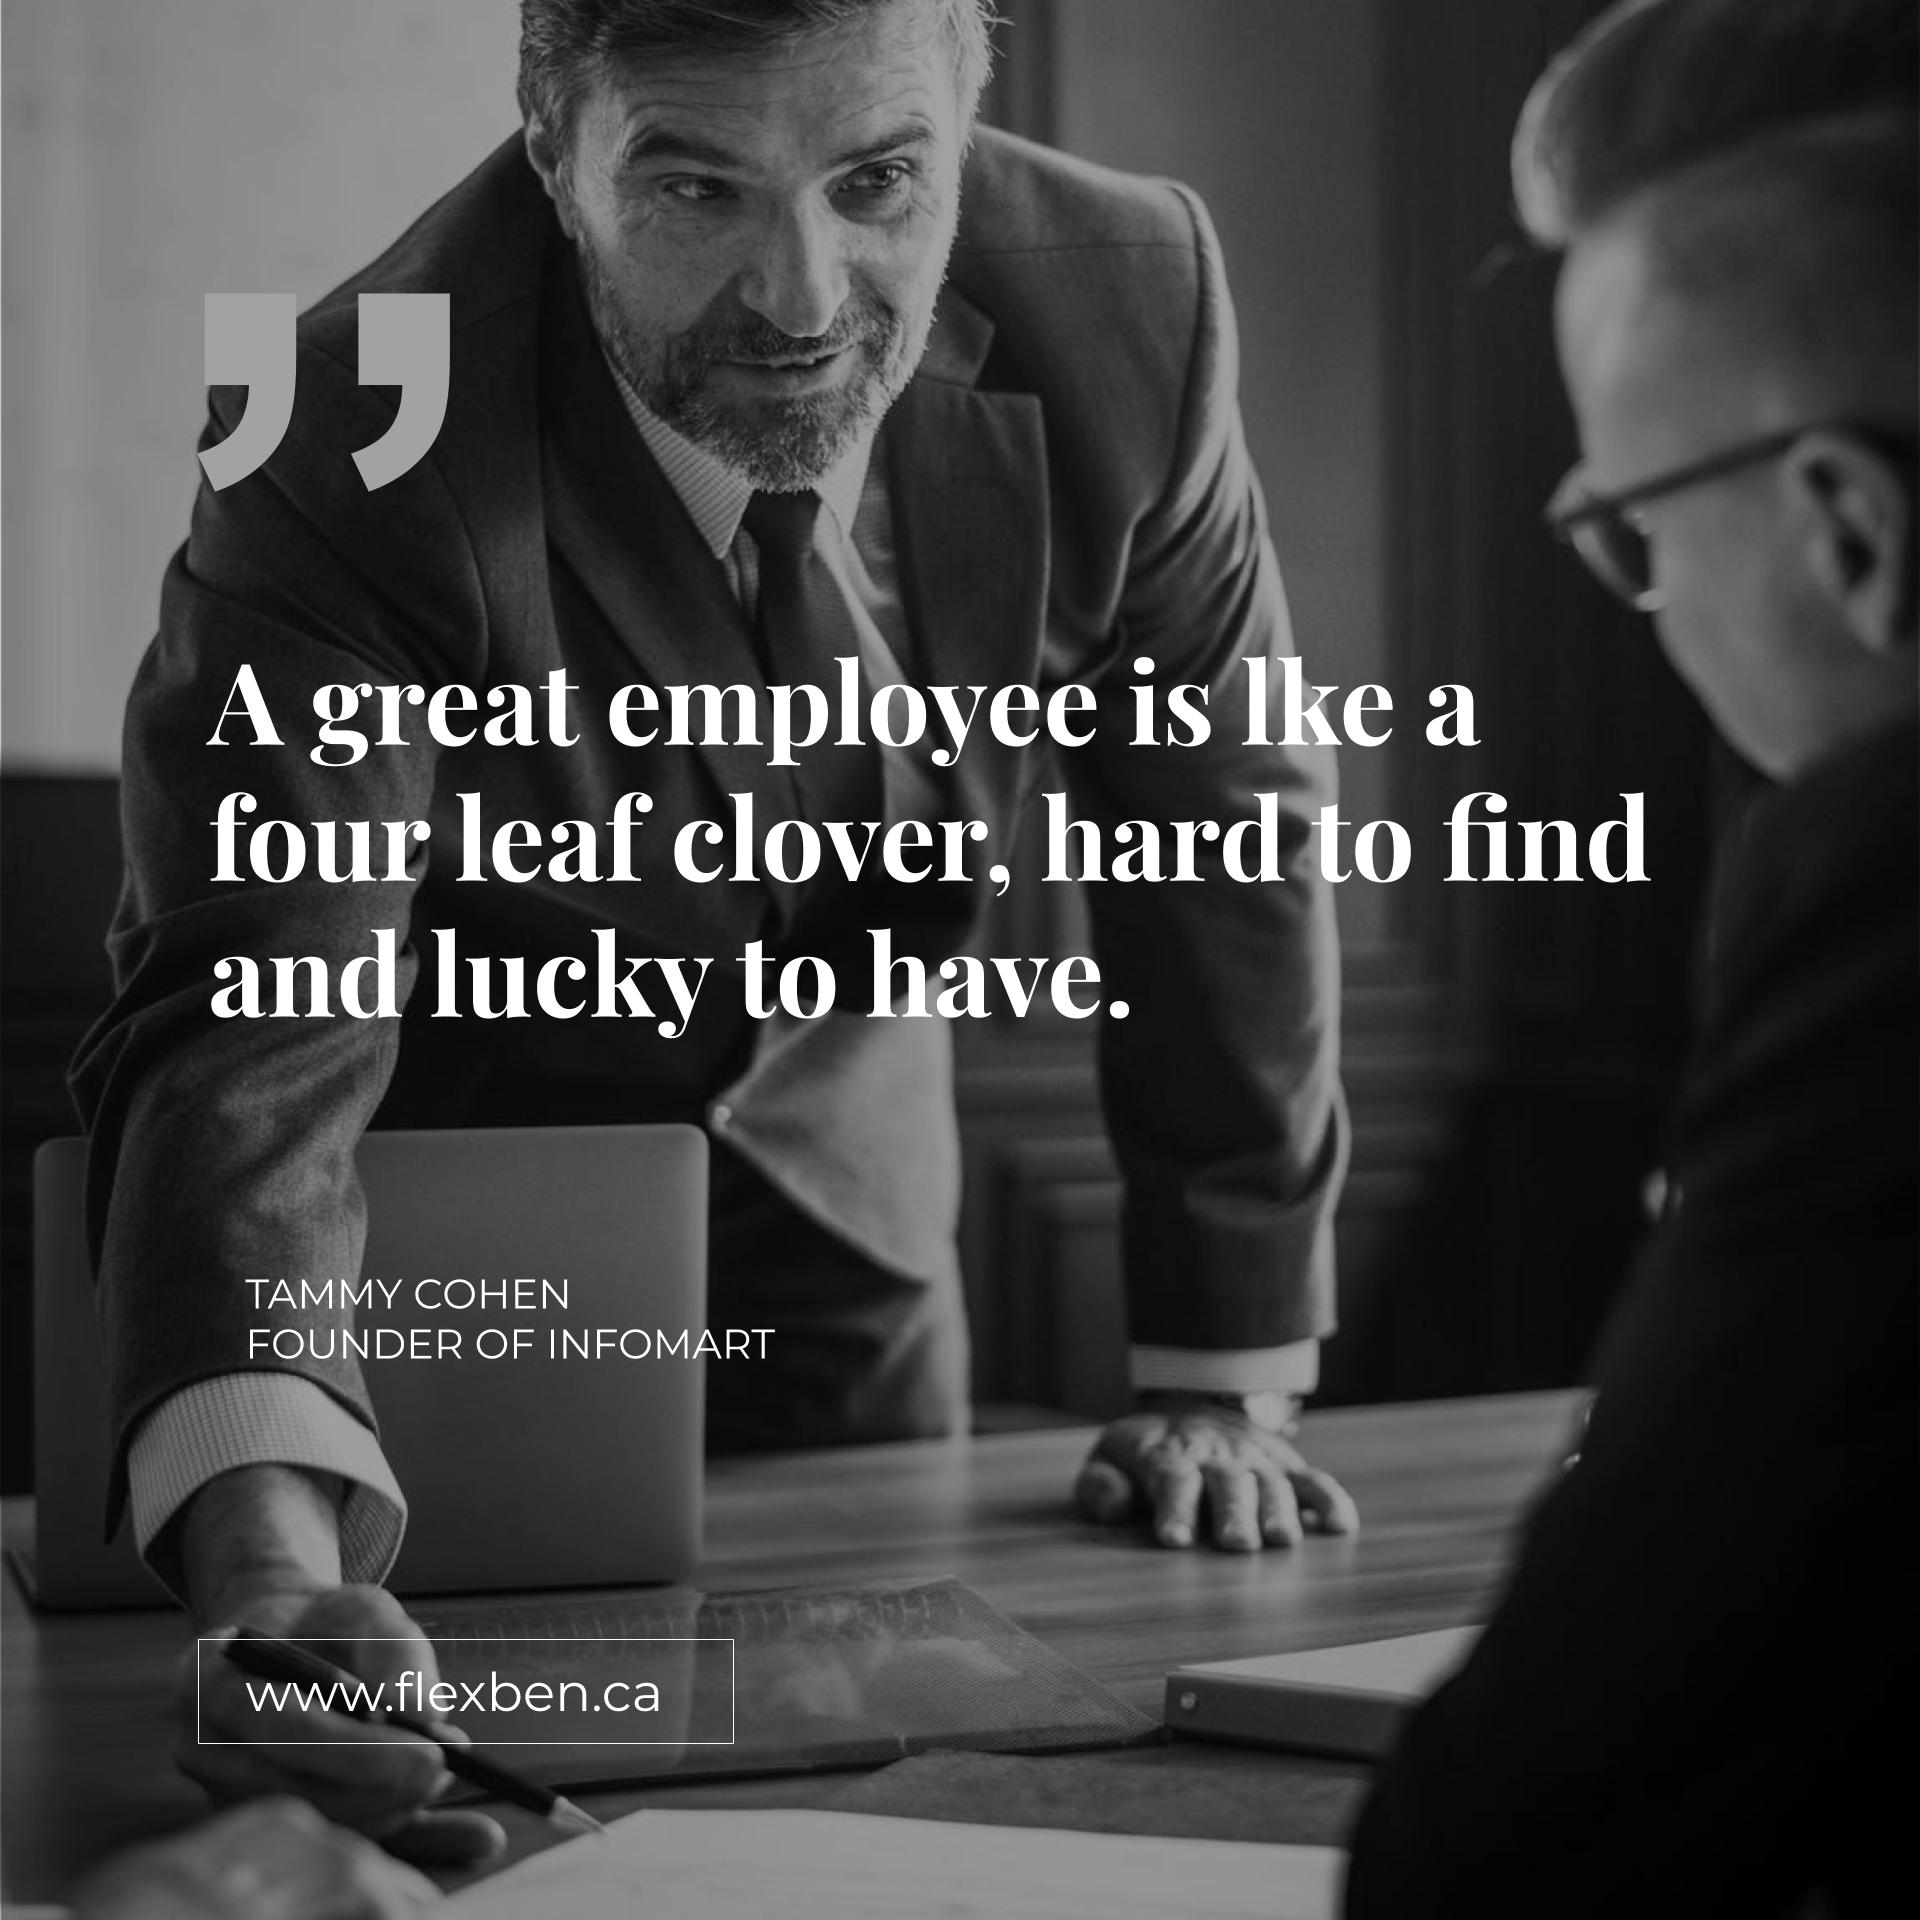 A Great Employee Is Like A Four Leaf Clover, Hard To Find And Lucky To Have